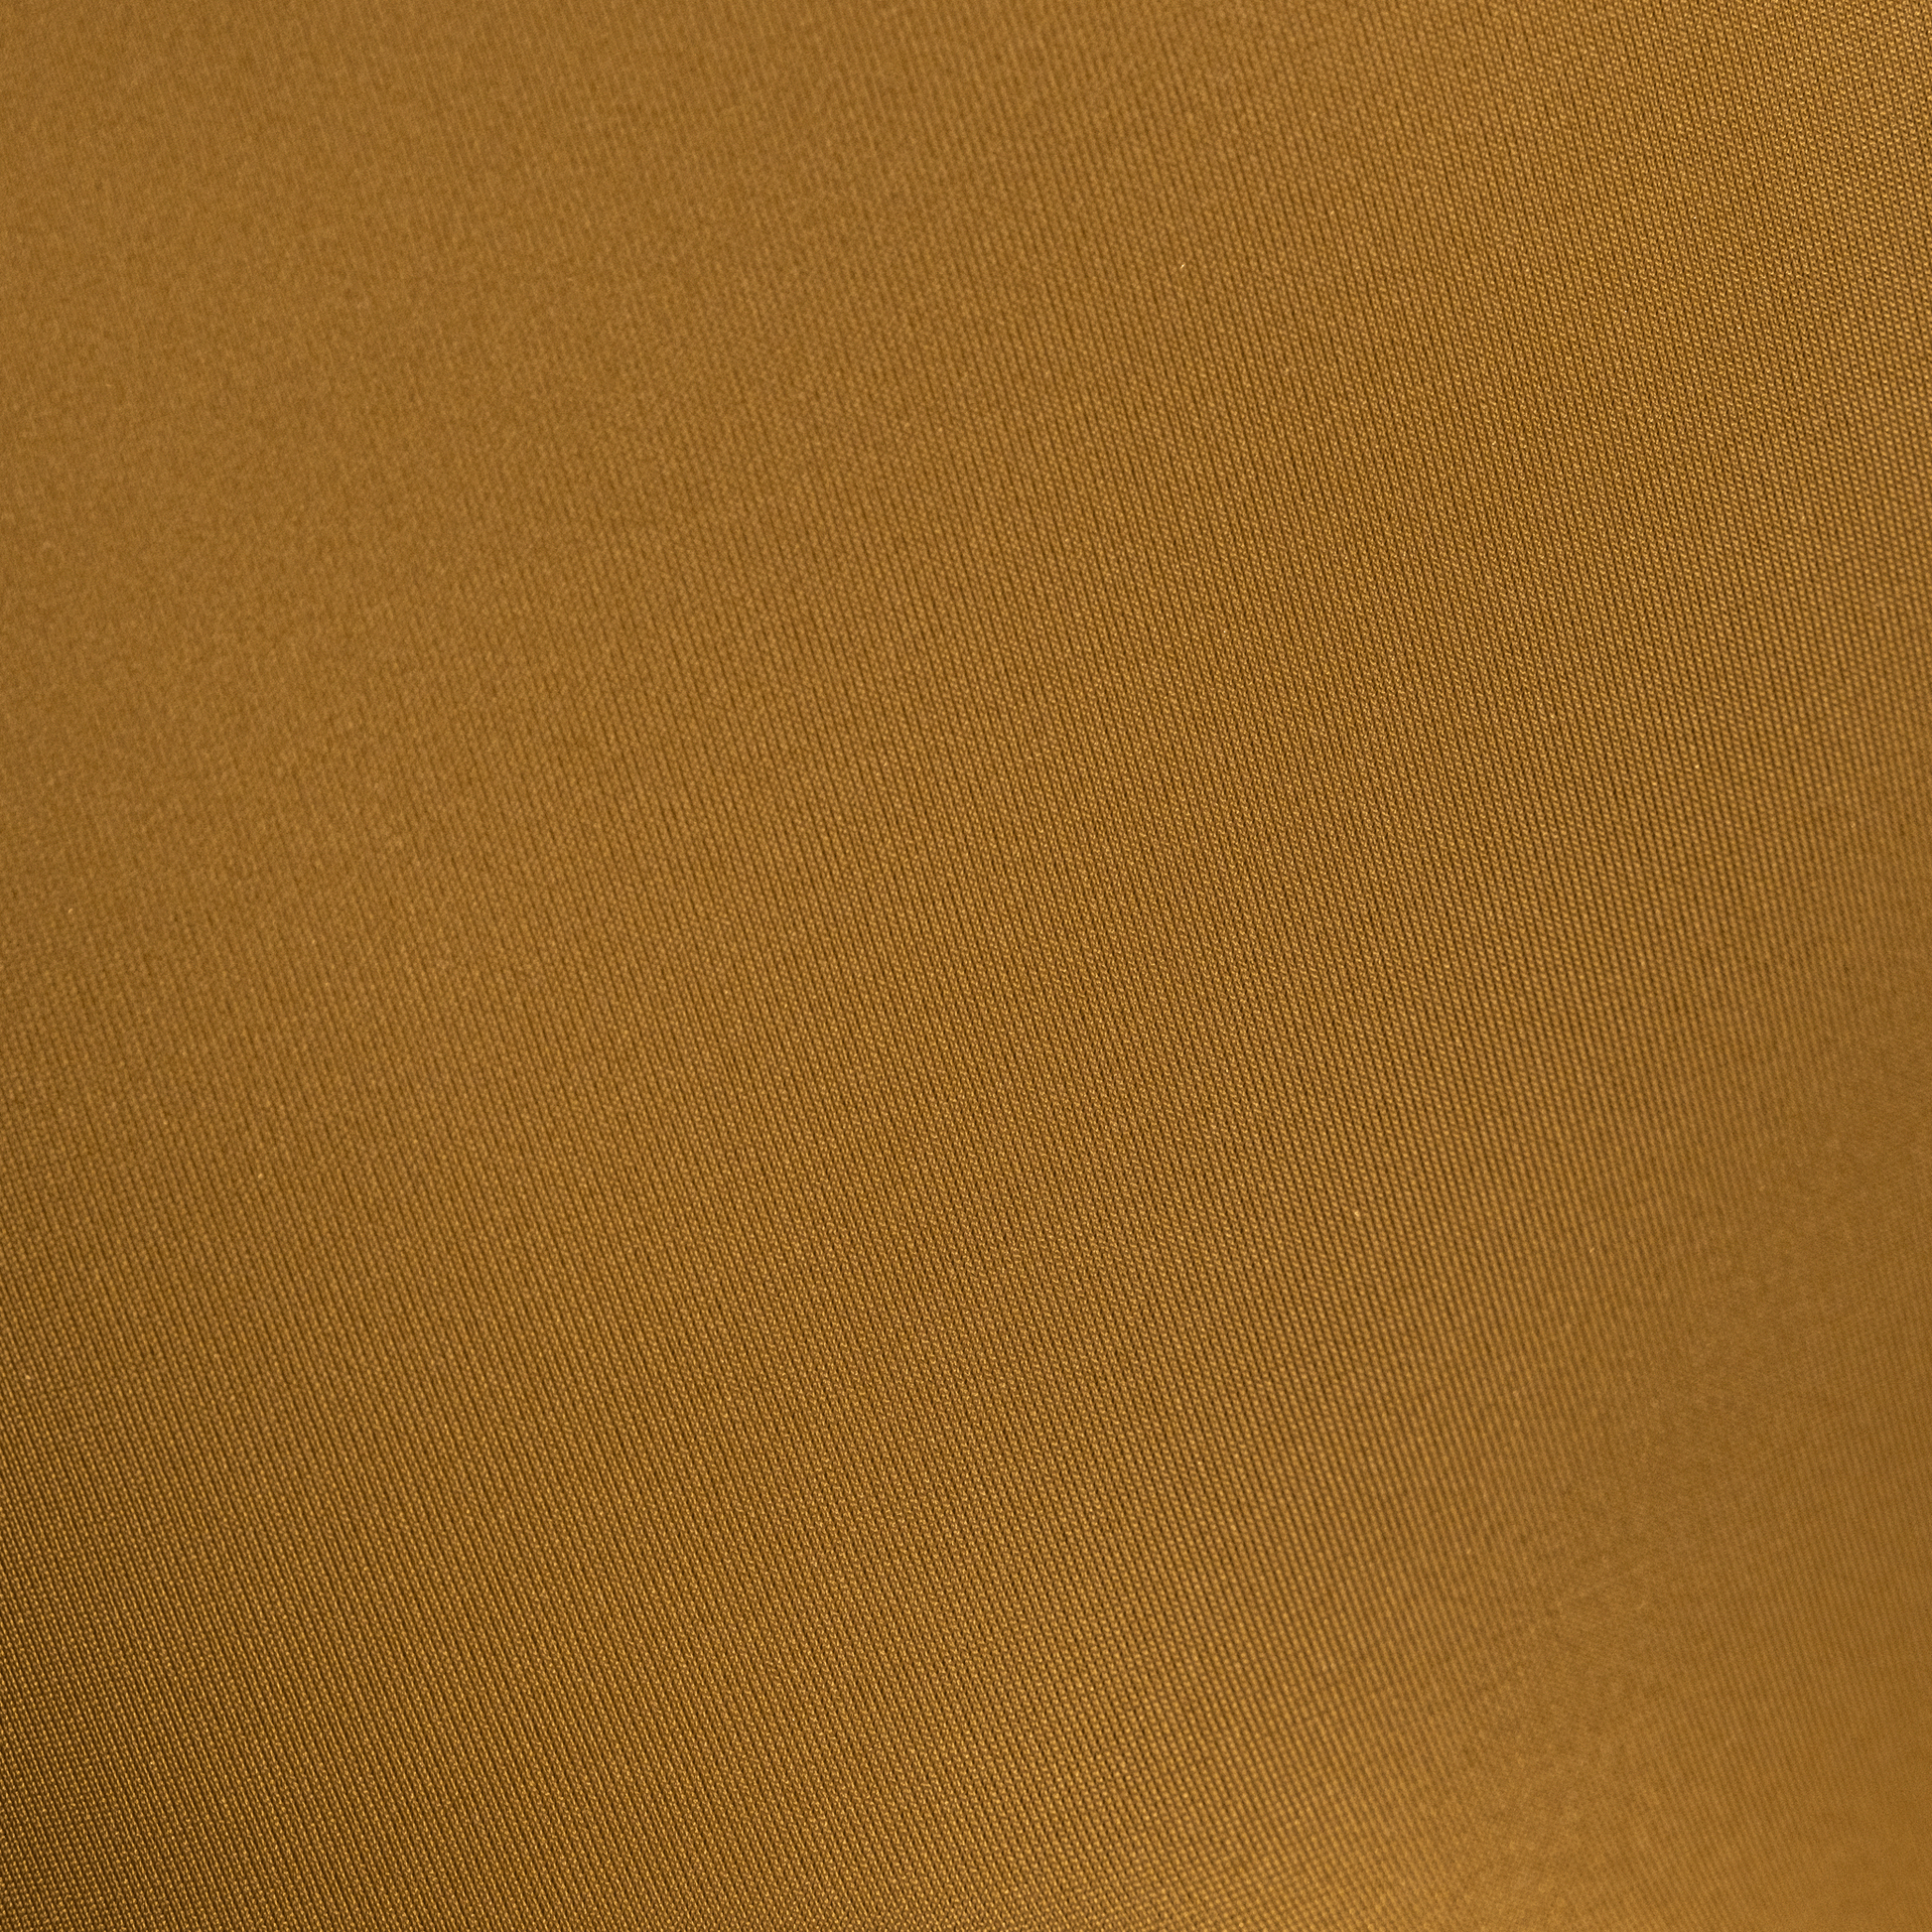 Detail of Recycled Fabric in Golden Brown